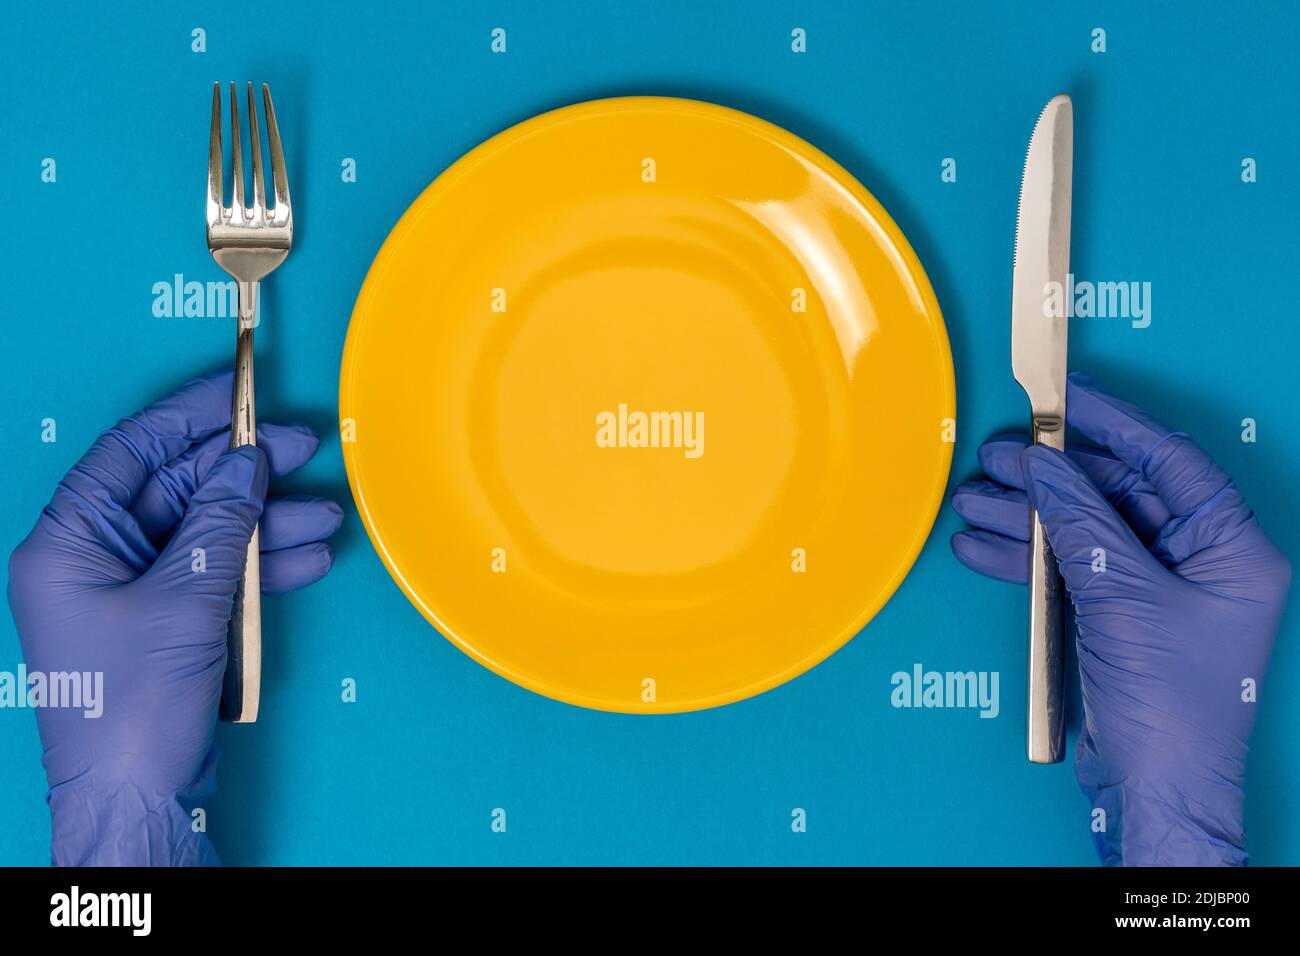 Hands in gloves keeping fork and knife over empty plate. Concept of the impact of the coronavirus pandemic on the food service industry. Stock Photo